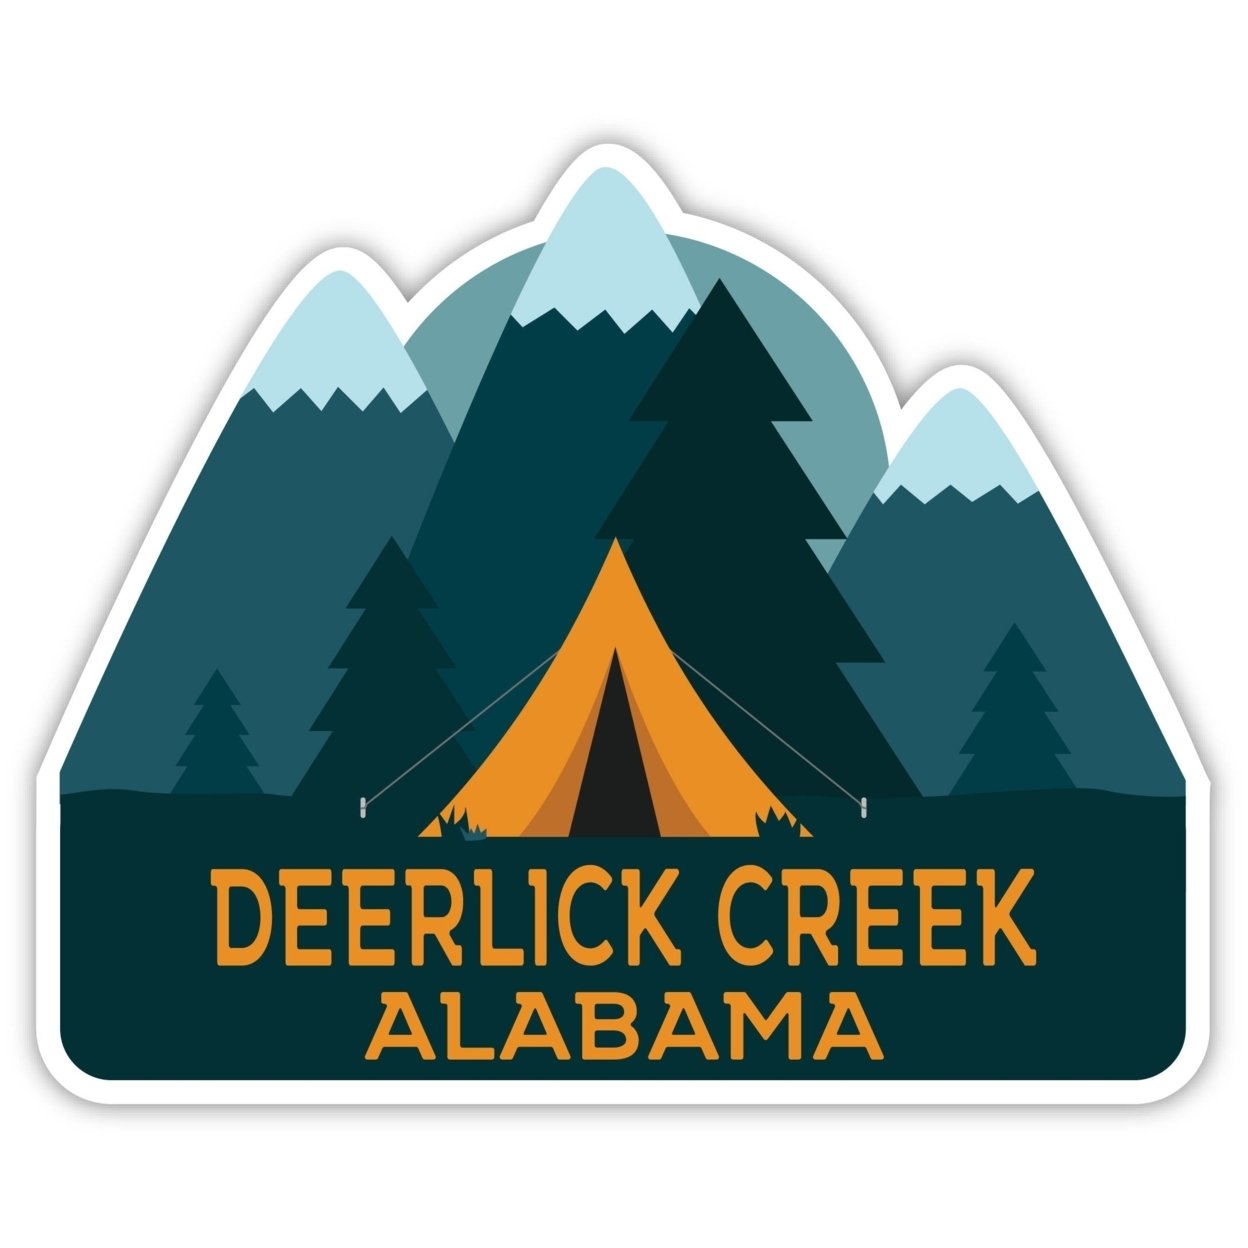 Deerlick Creek Alabama Souvenir Decorative Stickers (Choose Theme And Size) - Single Unit, 4-Inch, Great Outdoors